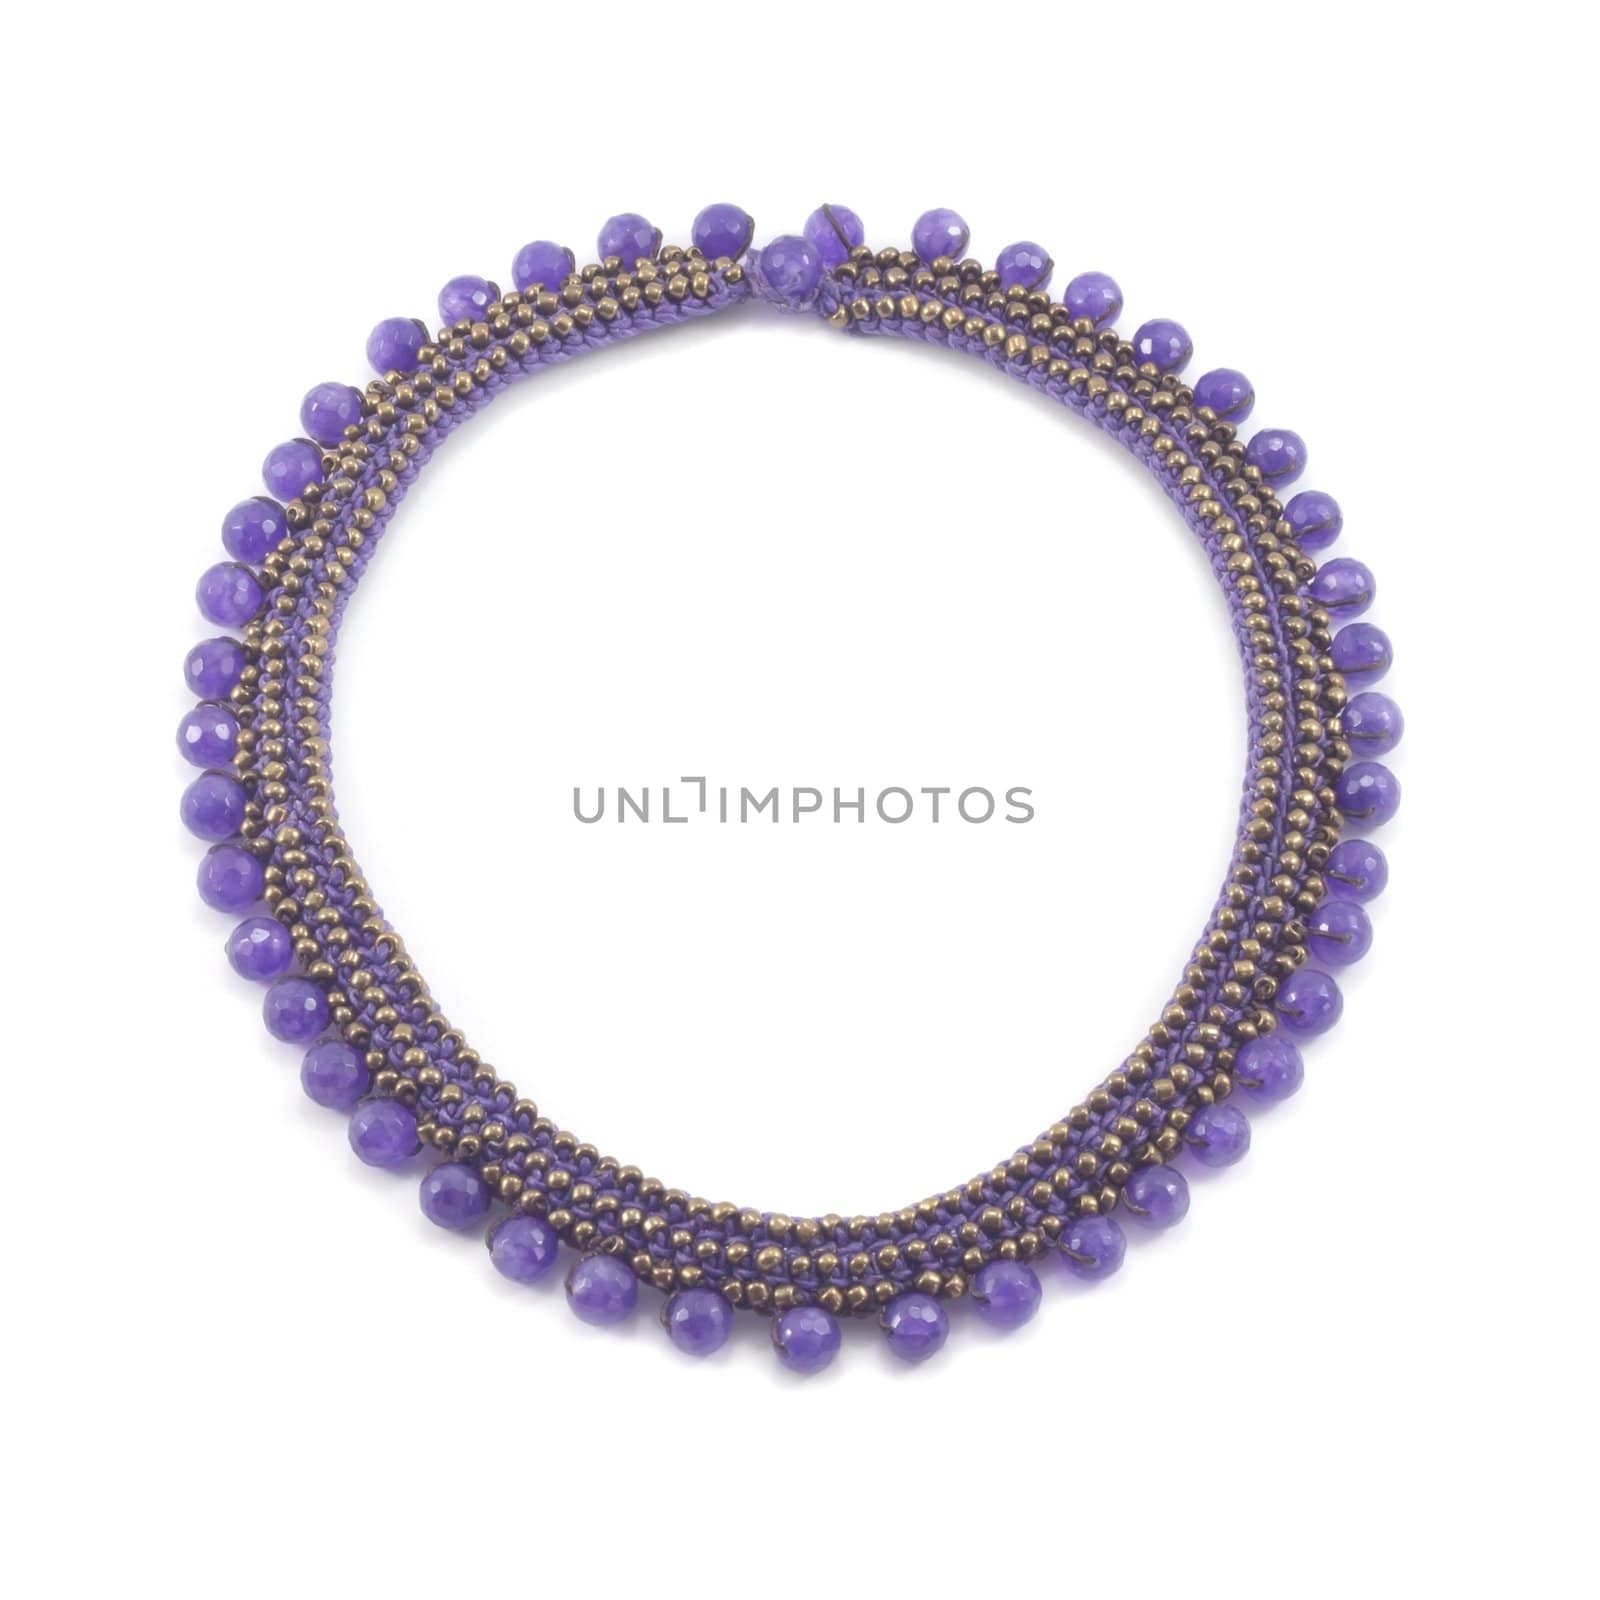 Amethyst necklace isolated (Designed by MouMoon) Thailand.